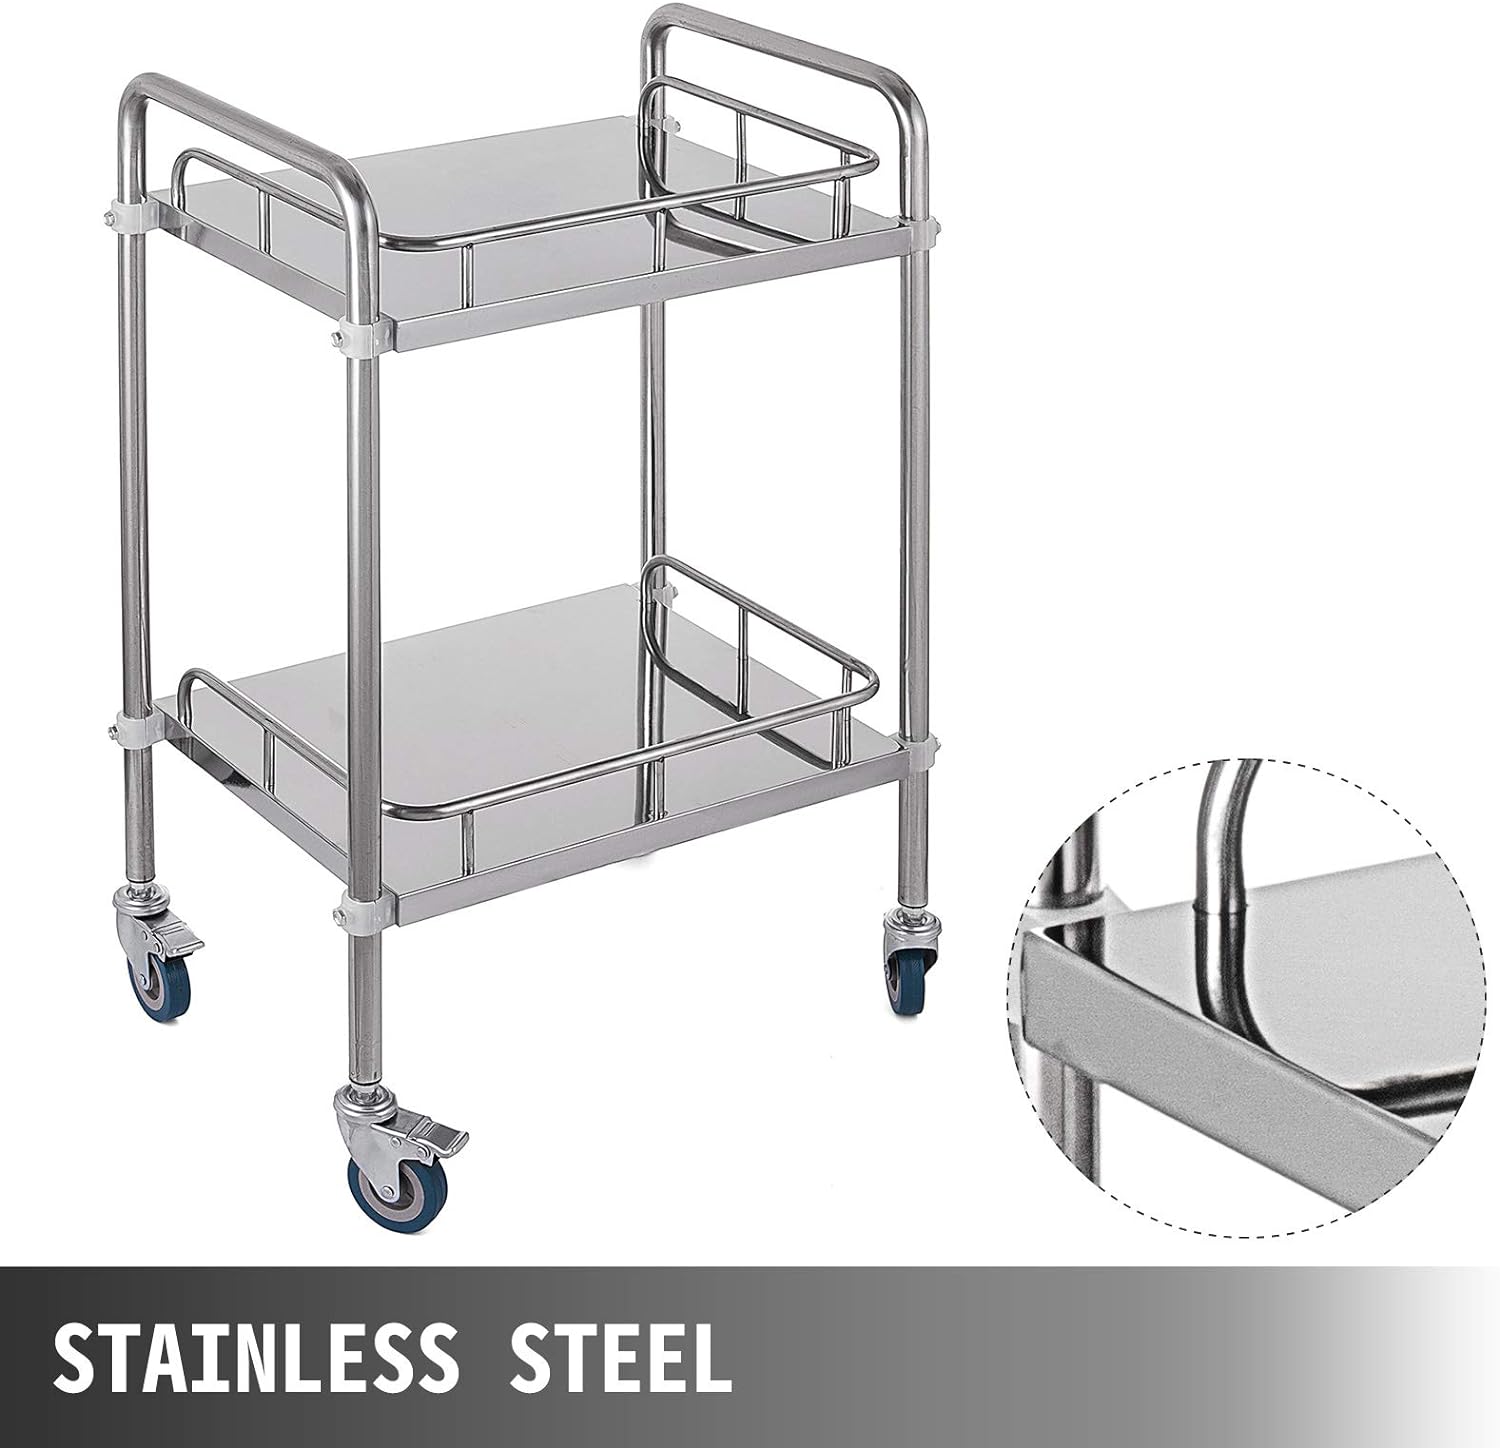 VEVOR 2-Shelf lab cart with Wheels Stainless Steel Rolling cart Lab Cart Utility Cart with high-Polish Stainless Steel 2 Lockable Whe